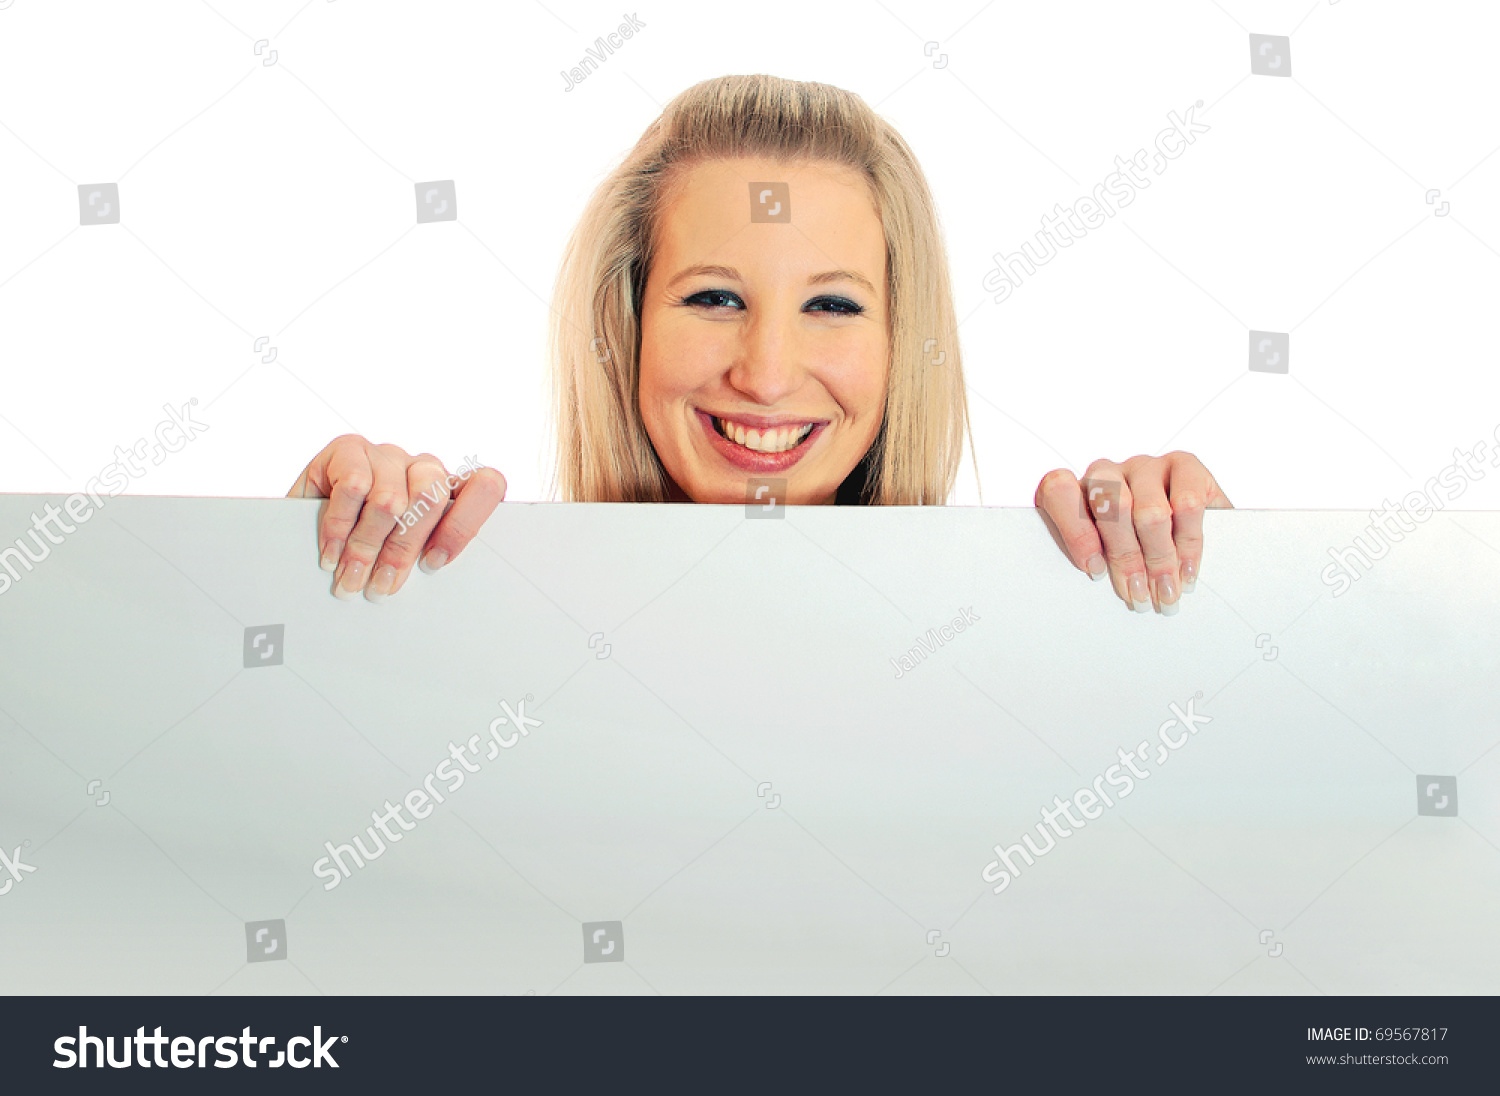 Portrait Attractive Smiling Young Woman Peeping Stock Photo 69567817 ...